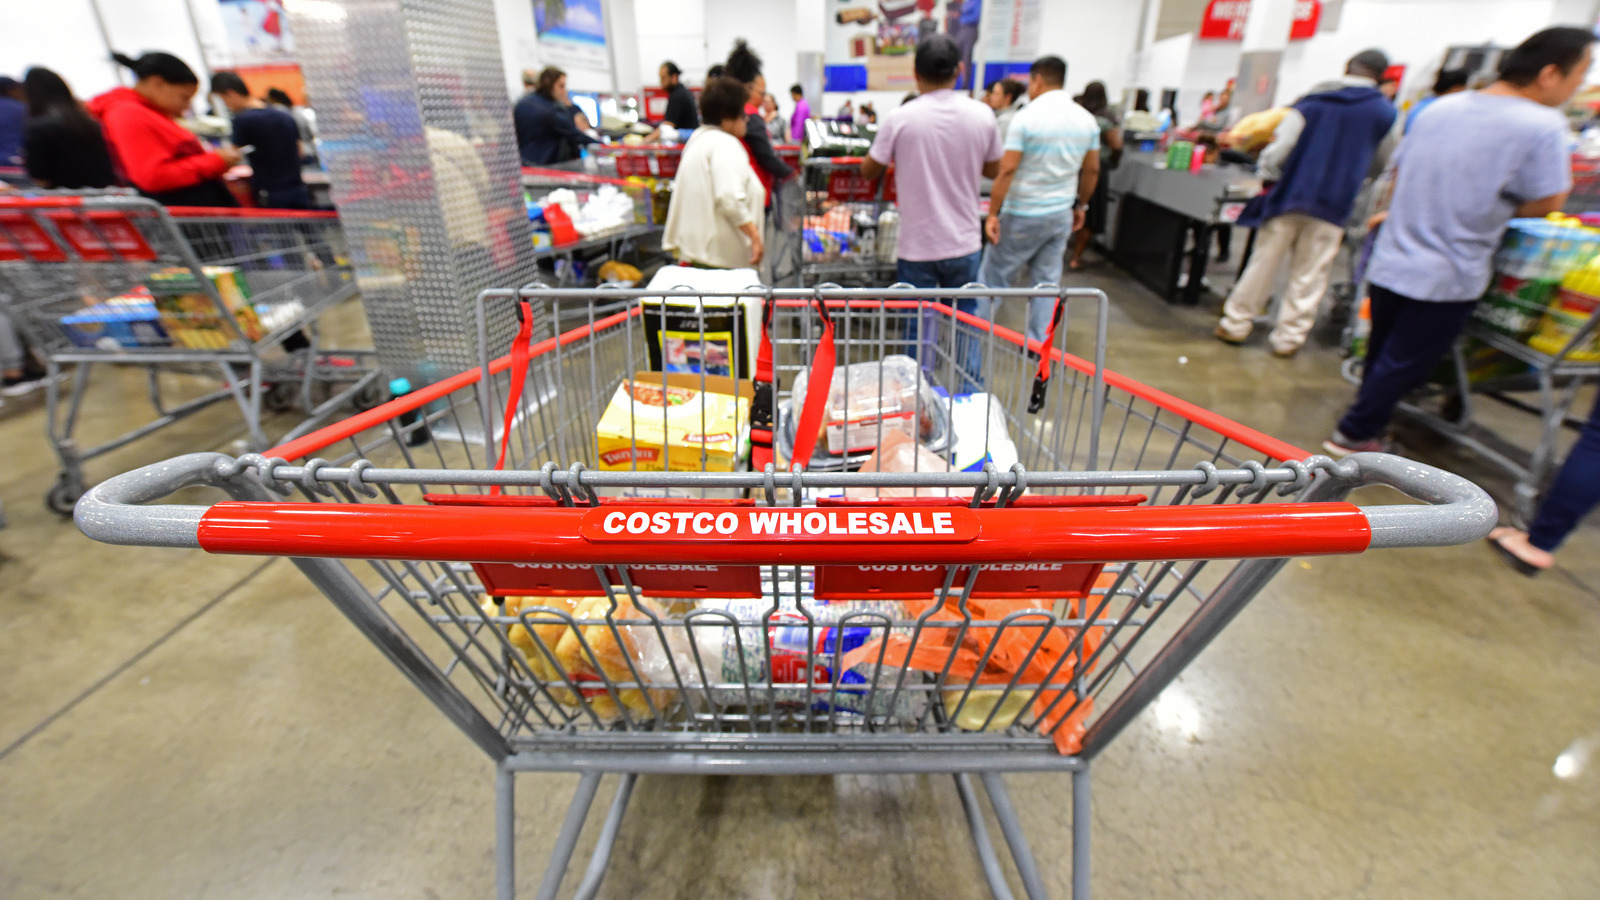 How Much Is A Costco Membership?